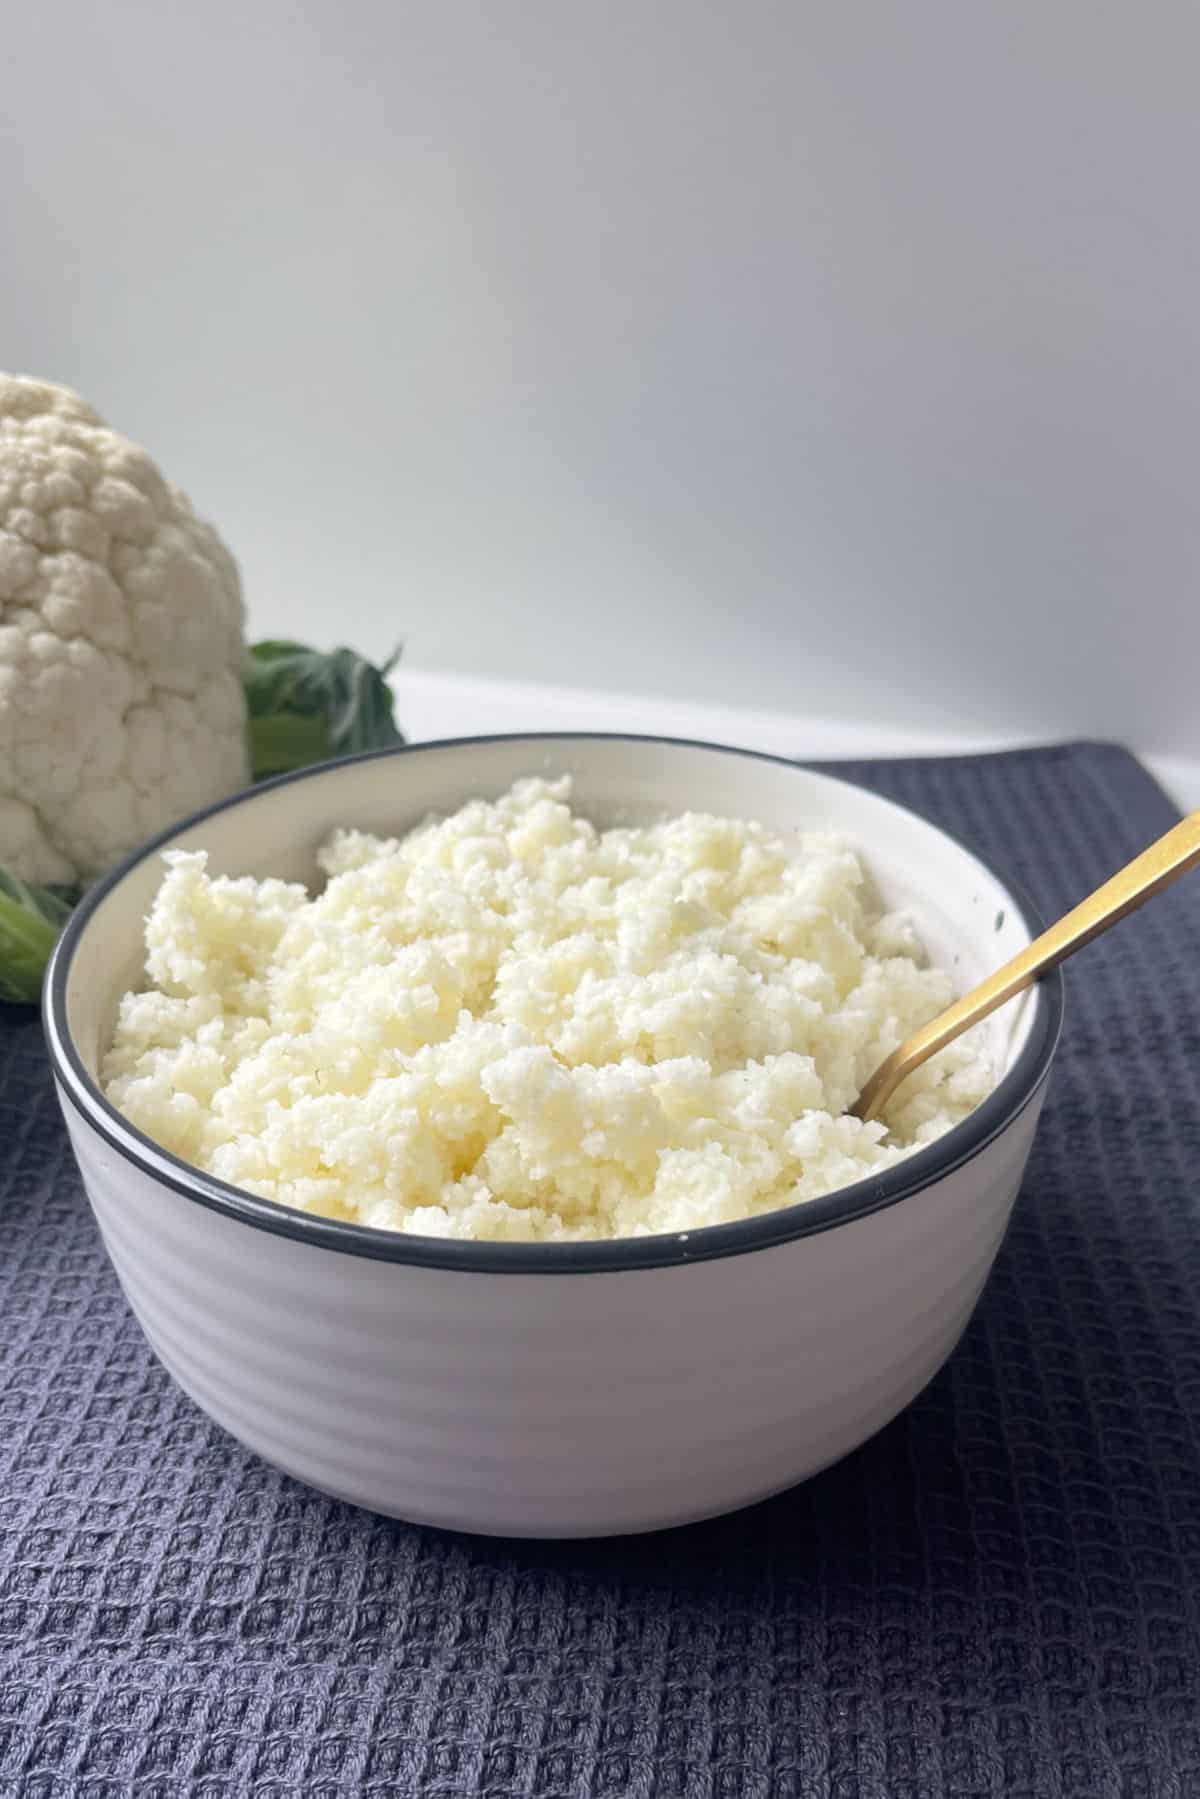 A bowl of Cauliflower Rice sitting on a dark grey towel with a cauliflower in background. There is a gold fork in the bowl.